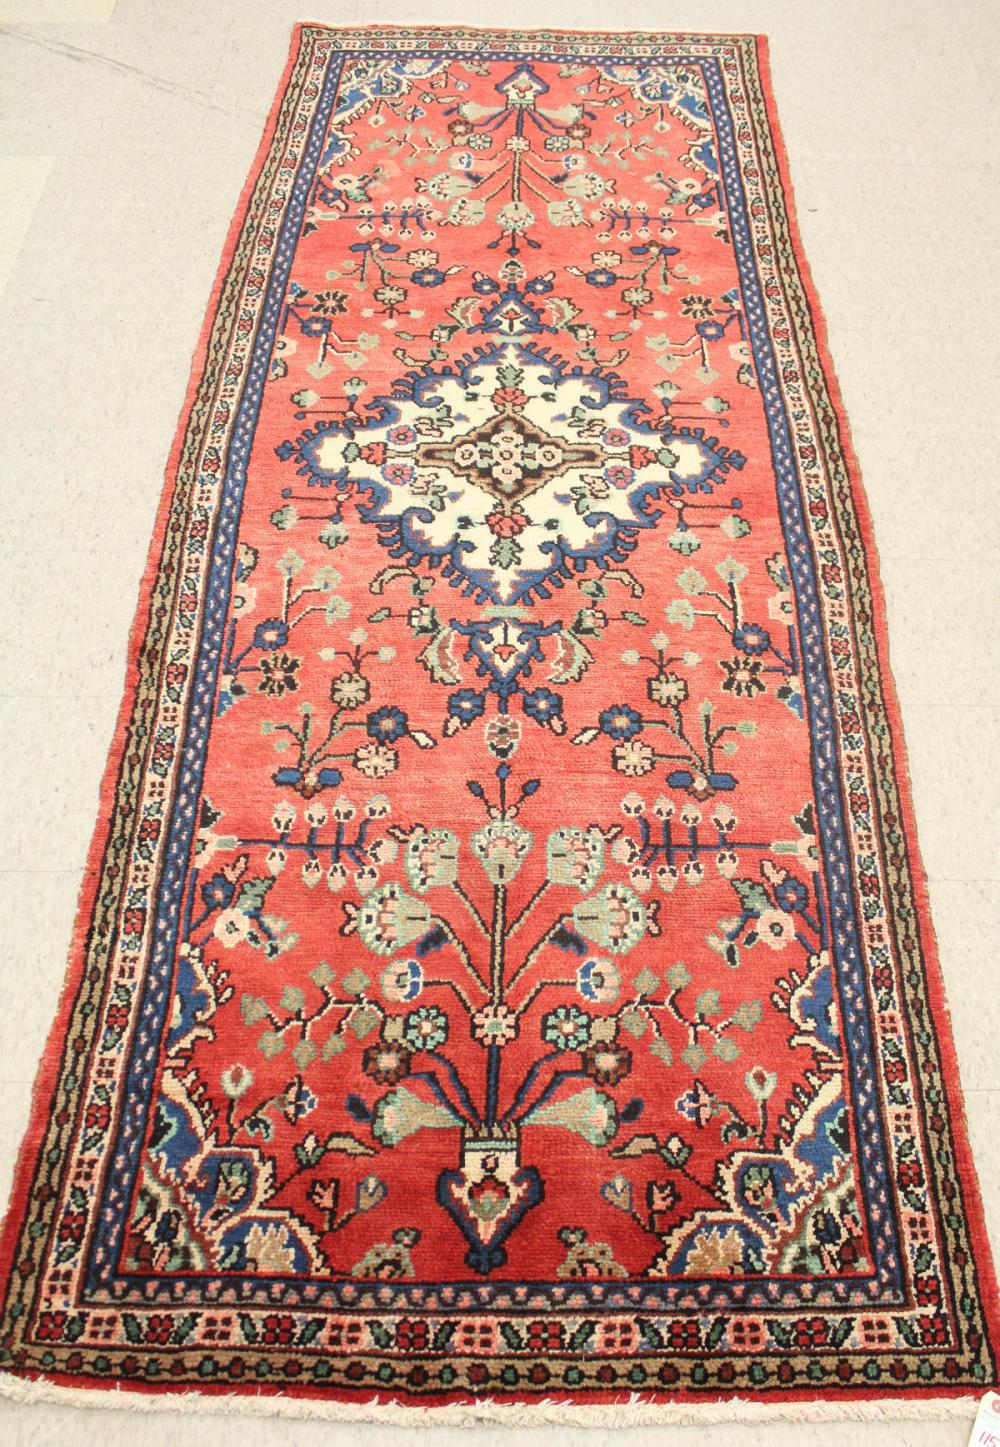 HAND KNOTTED PERSIAN RUG, FLORAL